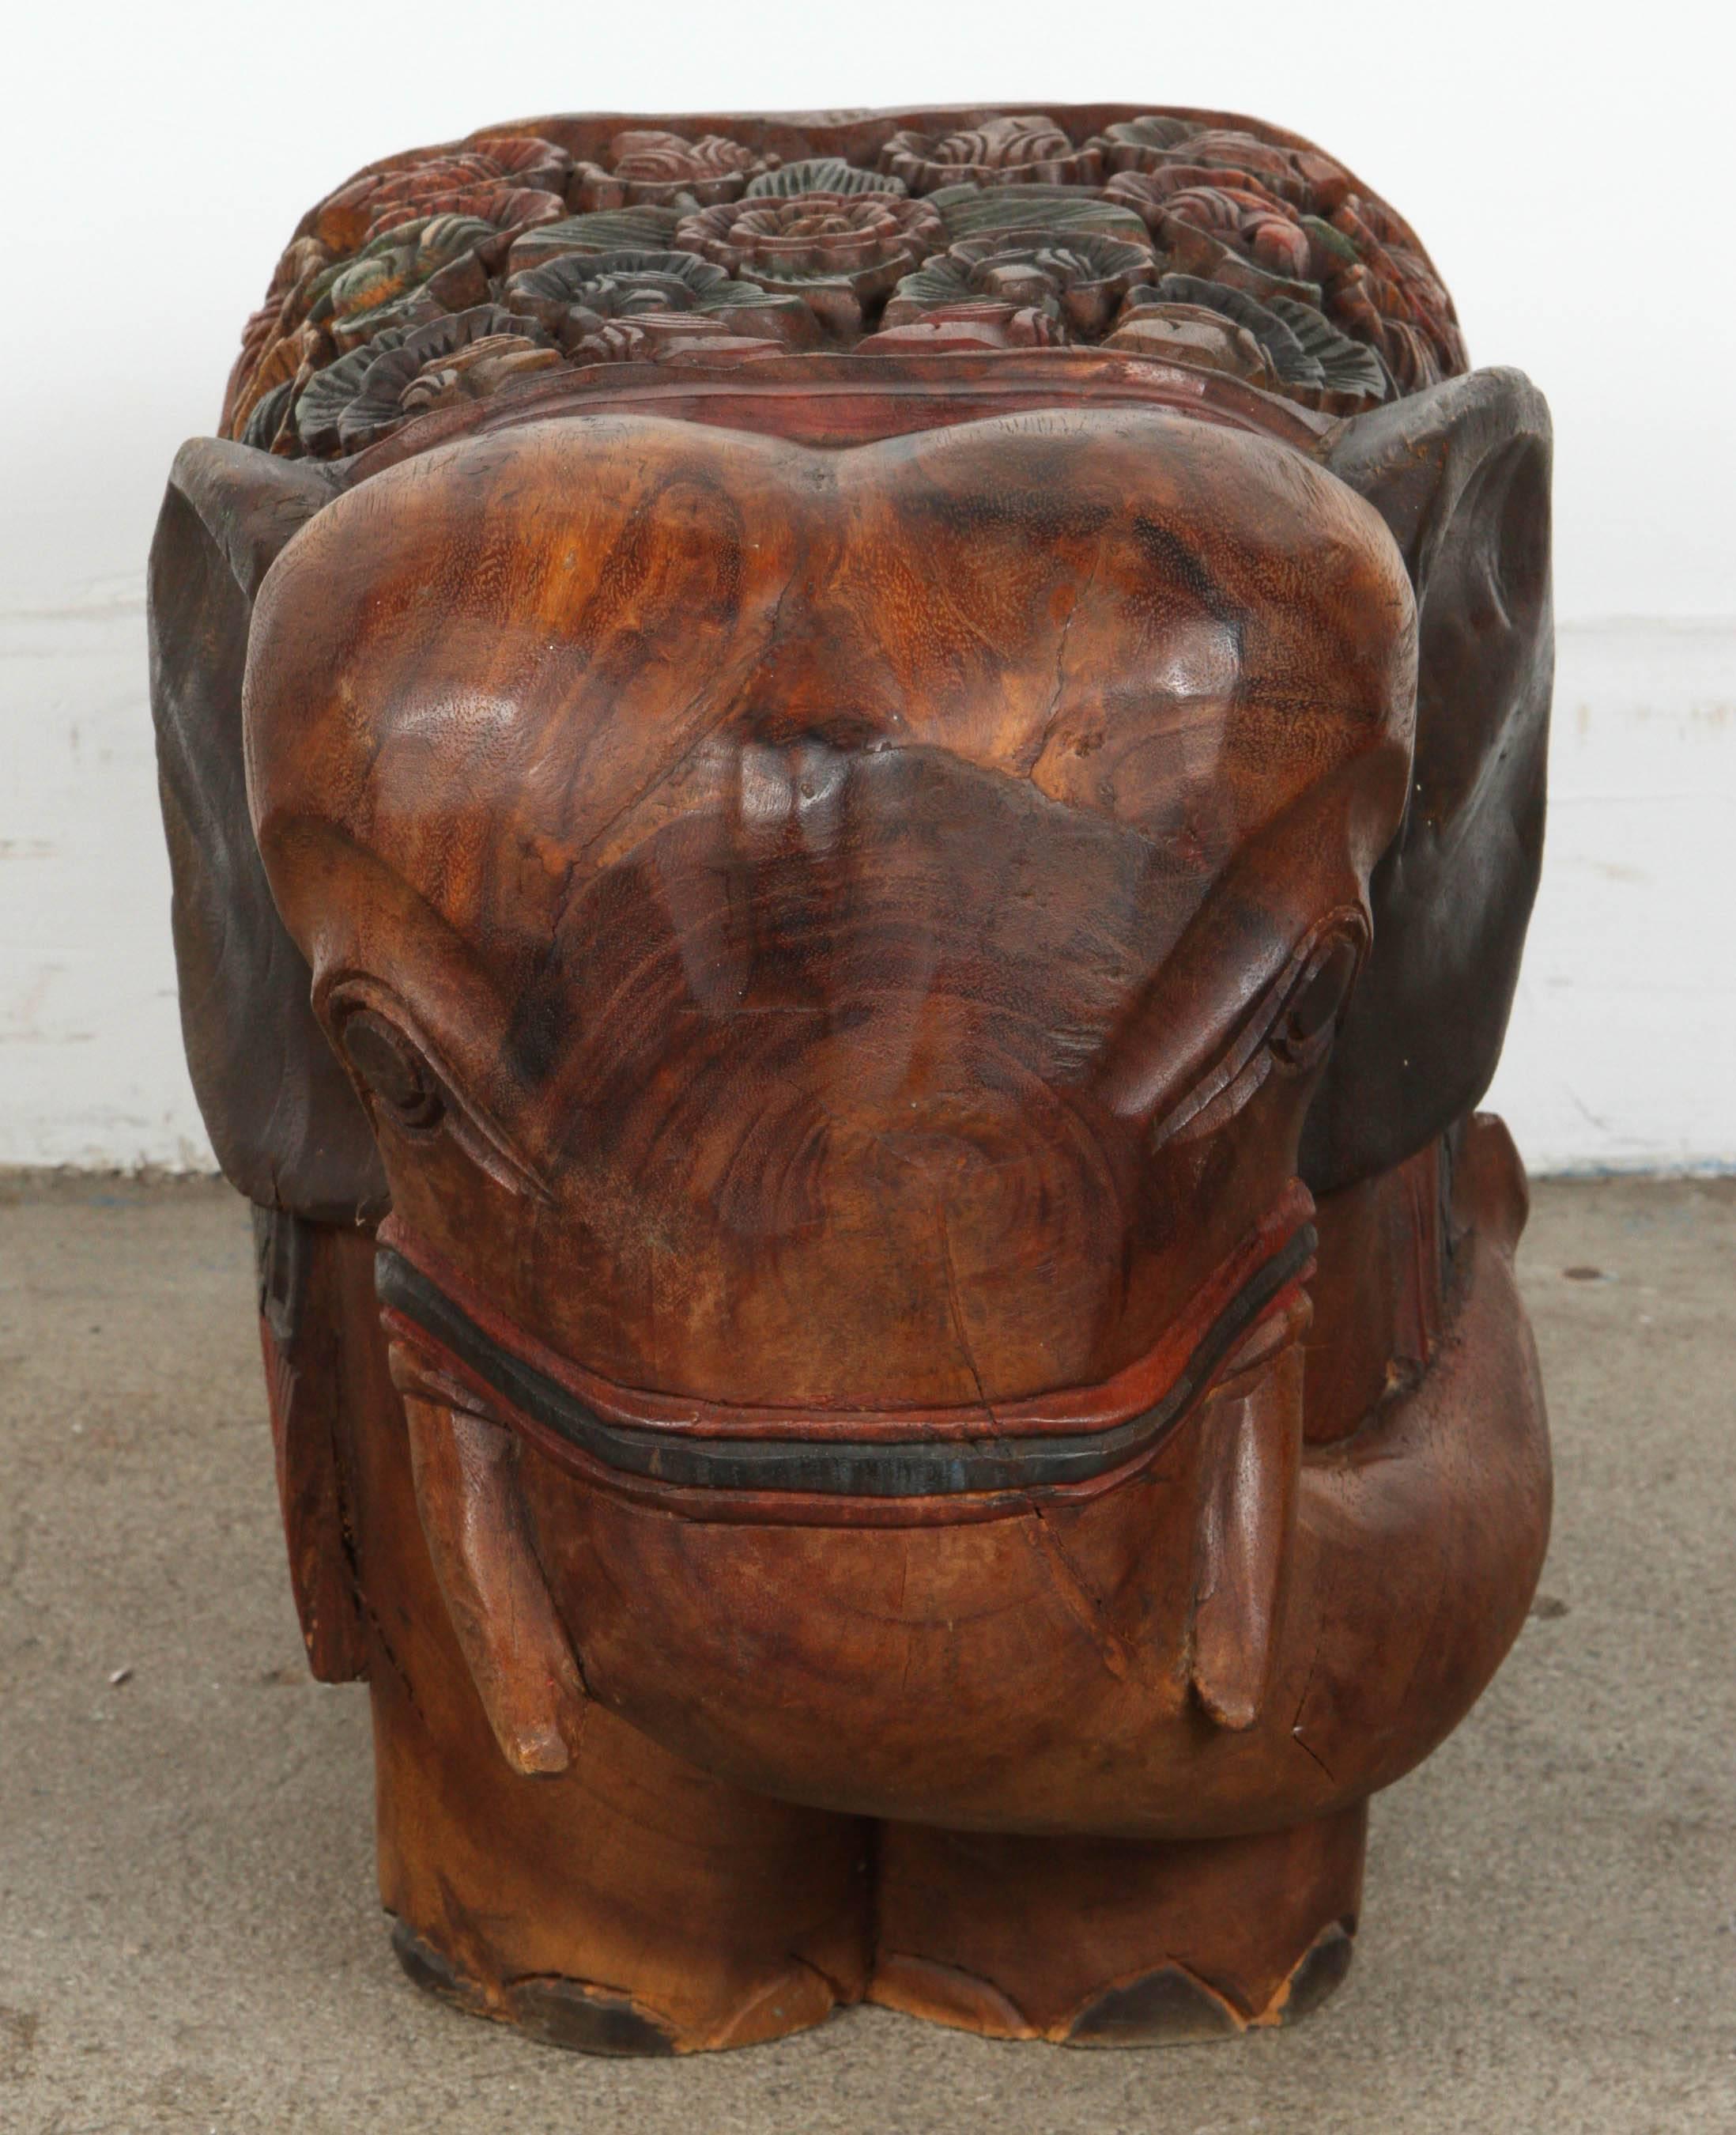 Hand-carved wooden elephant stool, or occasional table.
Very nice hand-made, hand-carved and hand painted on one piece of wood